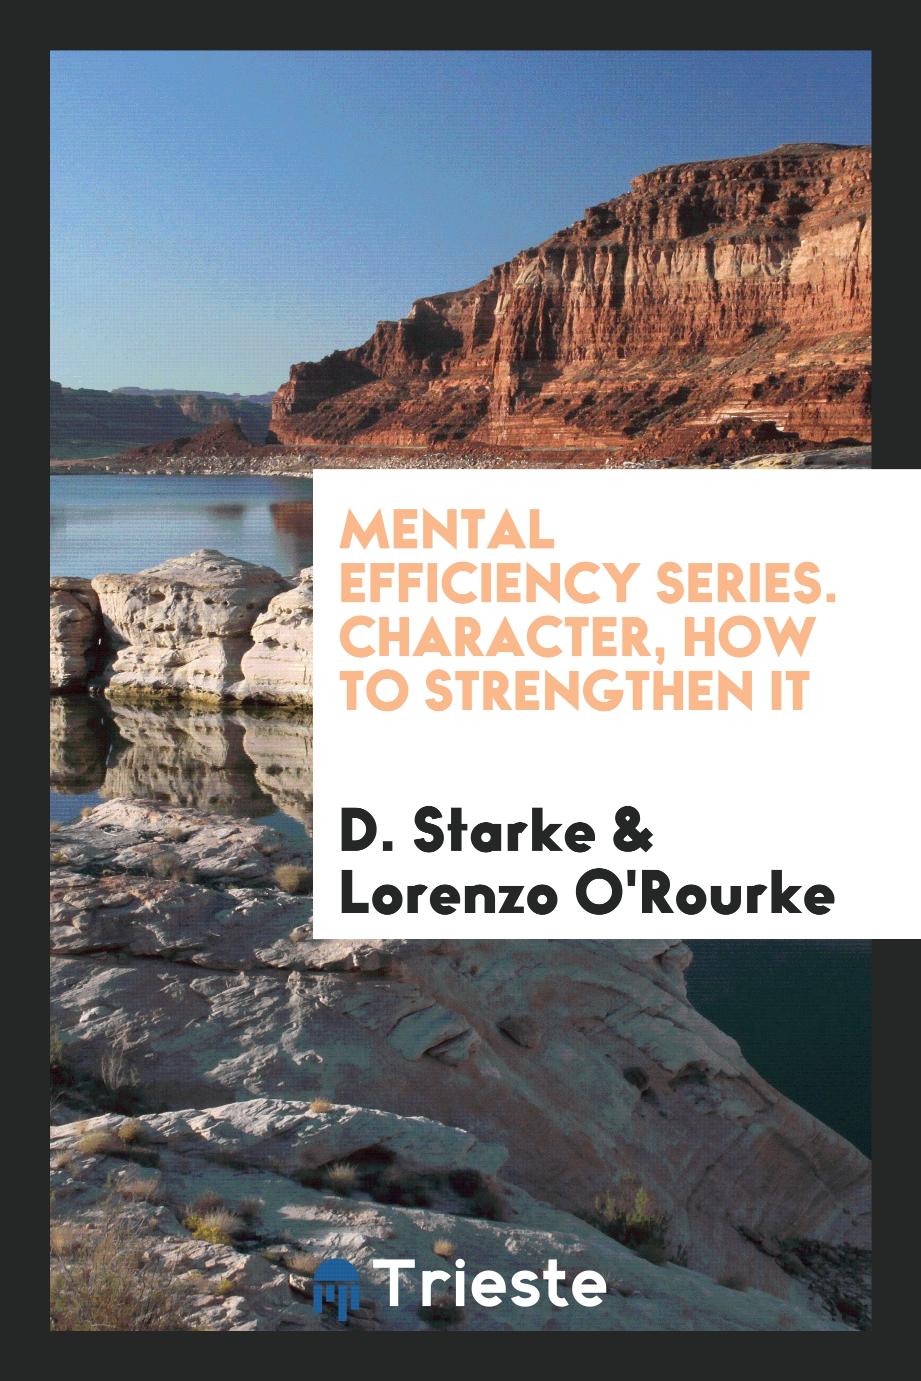 Mental Efficiency Series. Character, How to Strengthen It